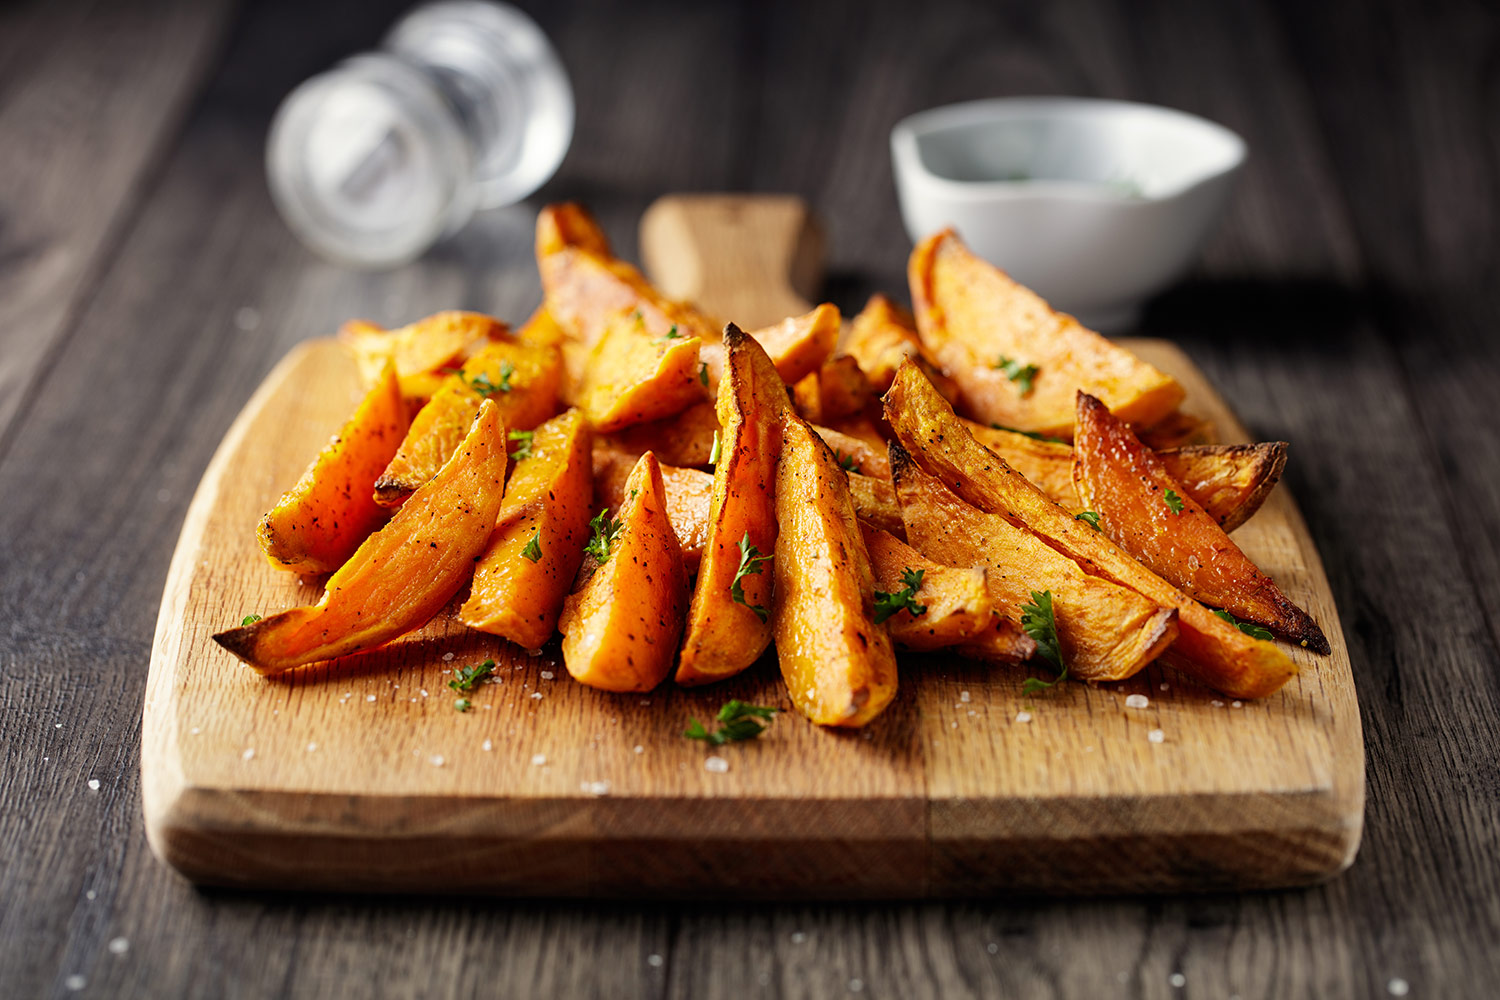 Sweet Potatoes Are the Next “It” Vegetable